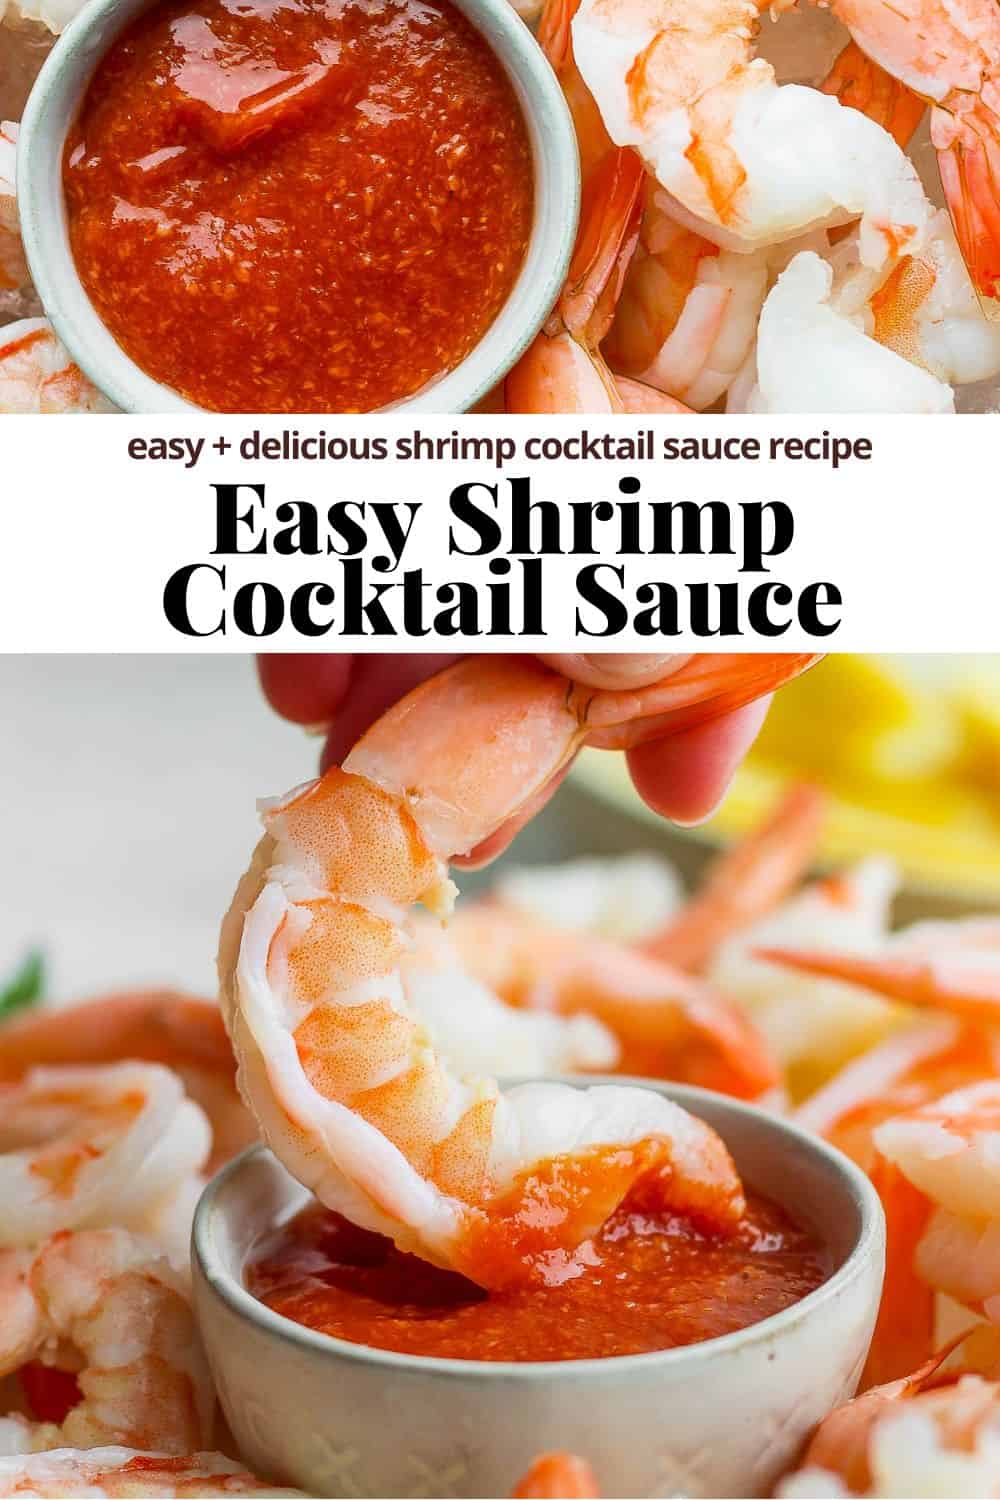 Pinterest image showing a bowl of cocktail sauce, the recipe title, and a hand dipping the shrimp into the sauce.